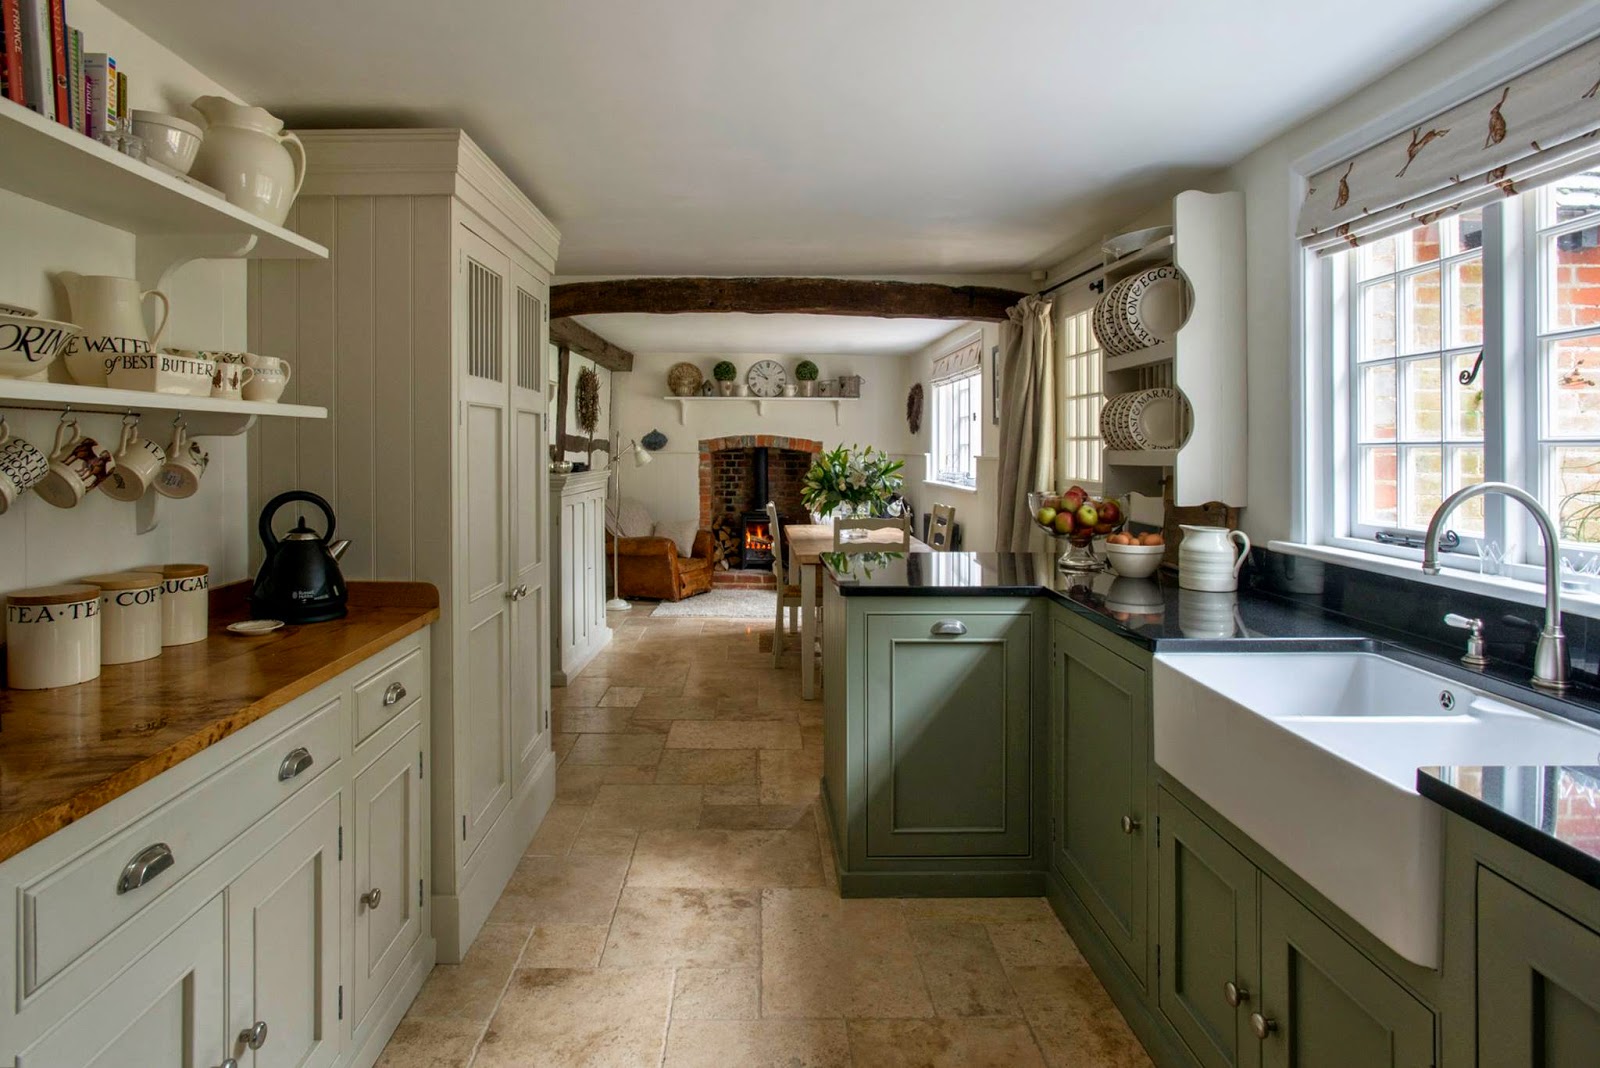 modern country kitchens images photo - 1